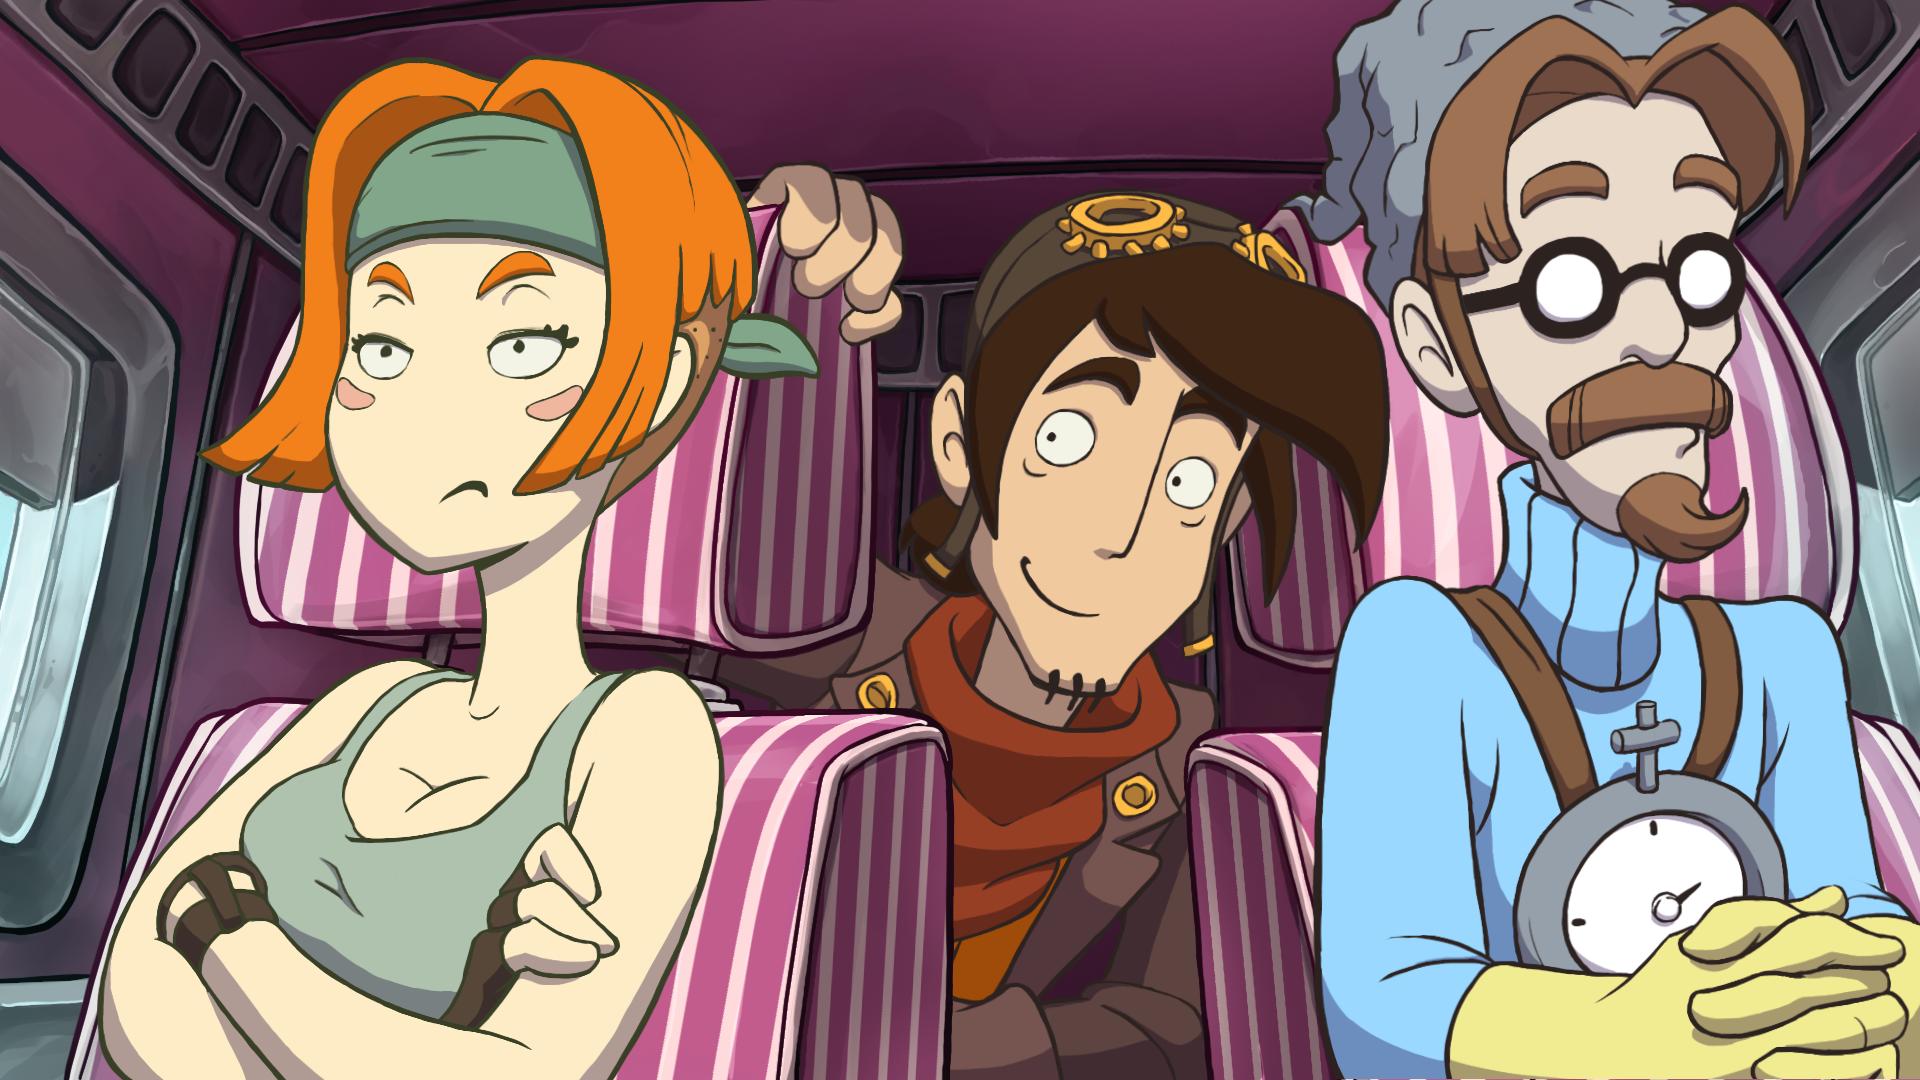 deponia switch physical